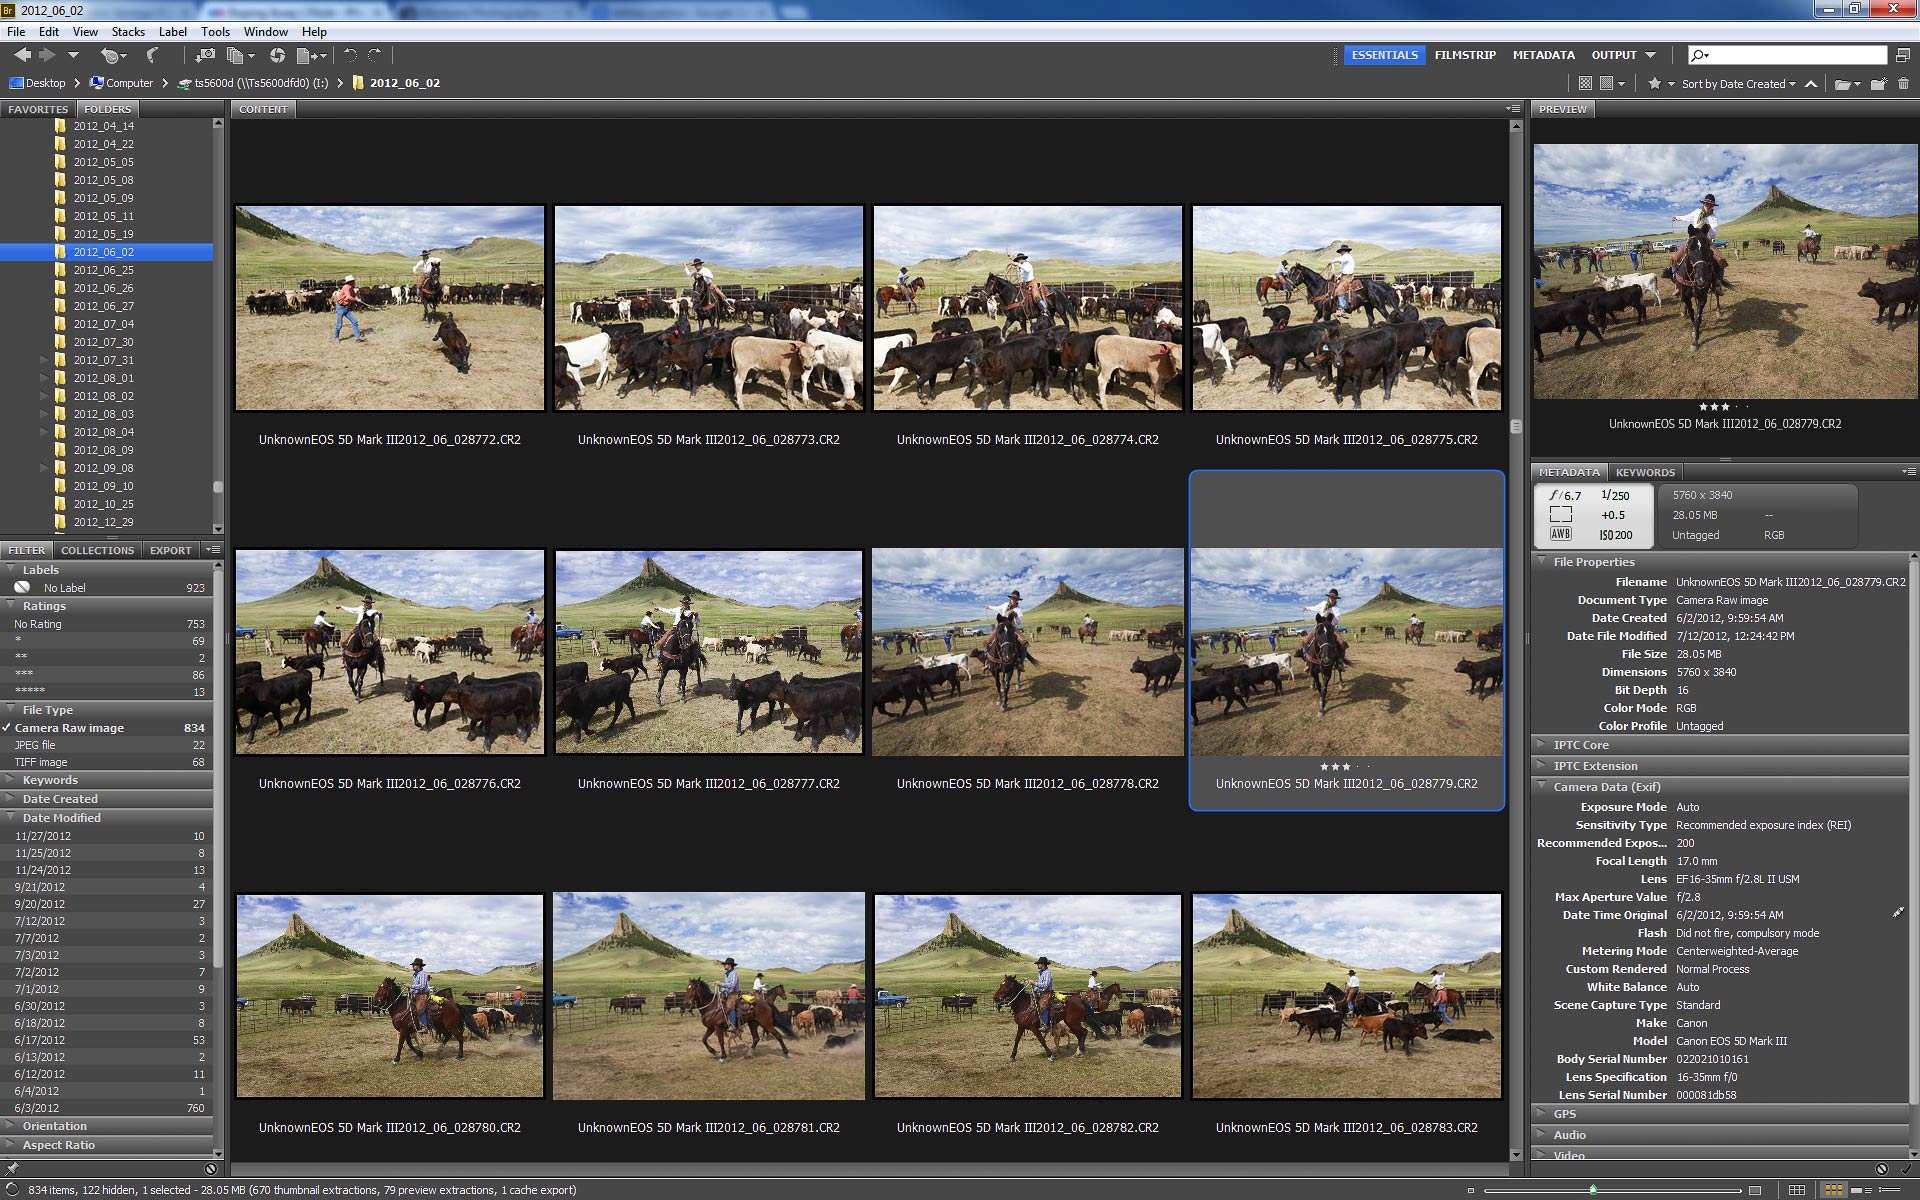 Adobe Bridge, which shows the shots before and after the photo "Roping Away."